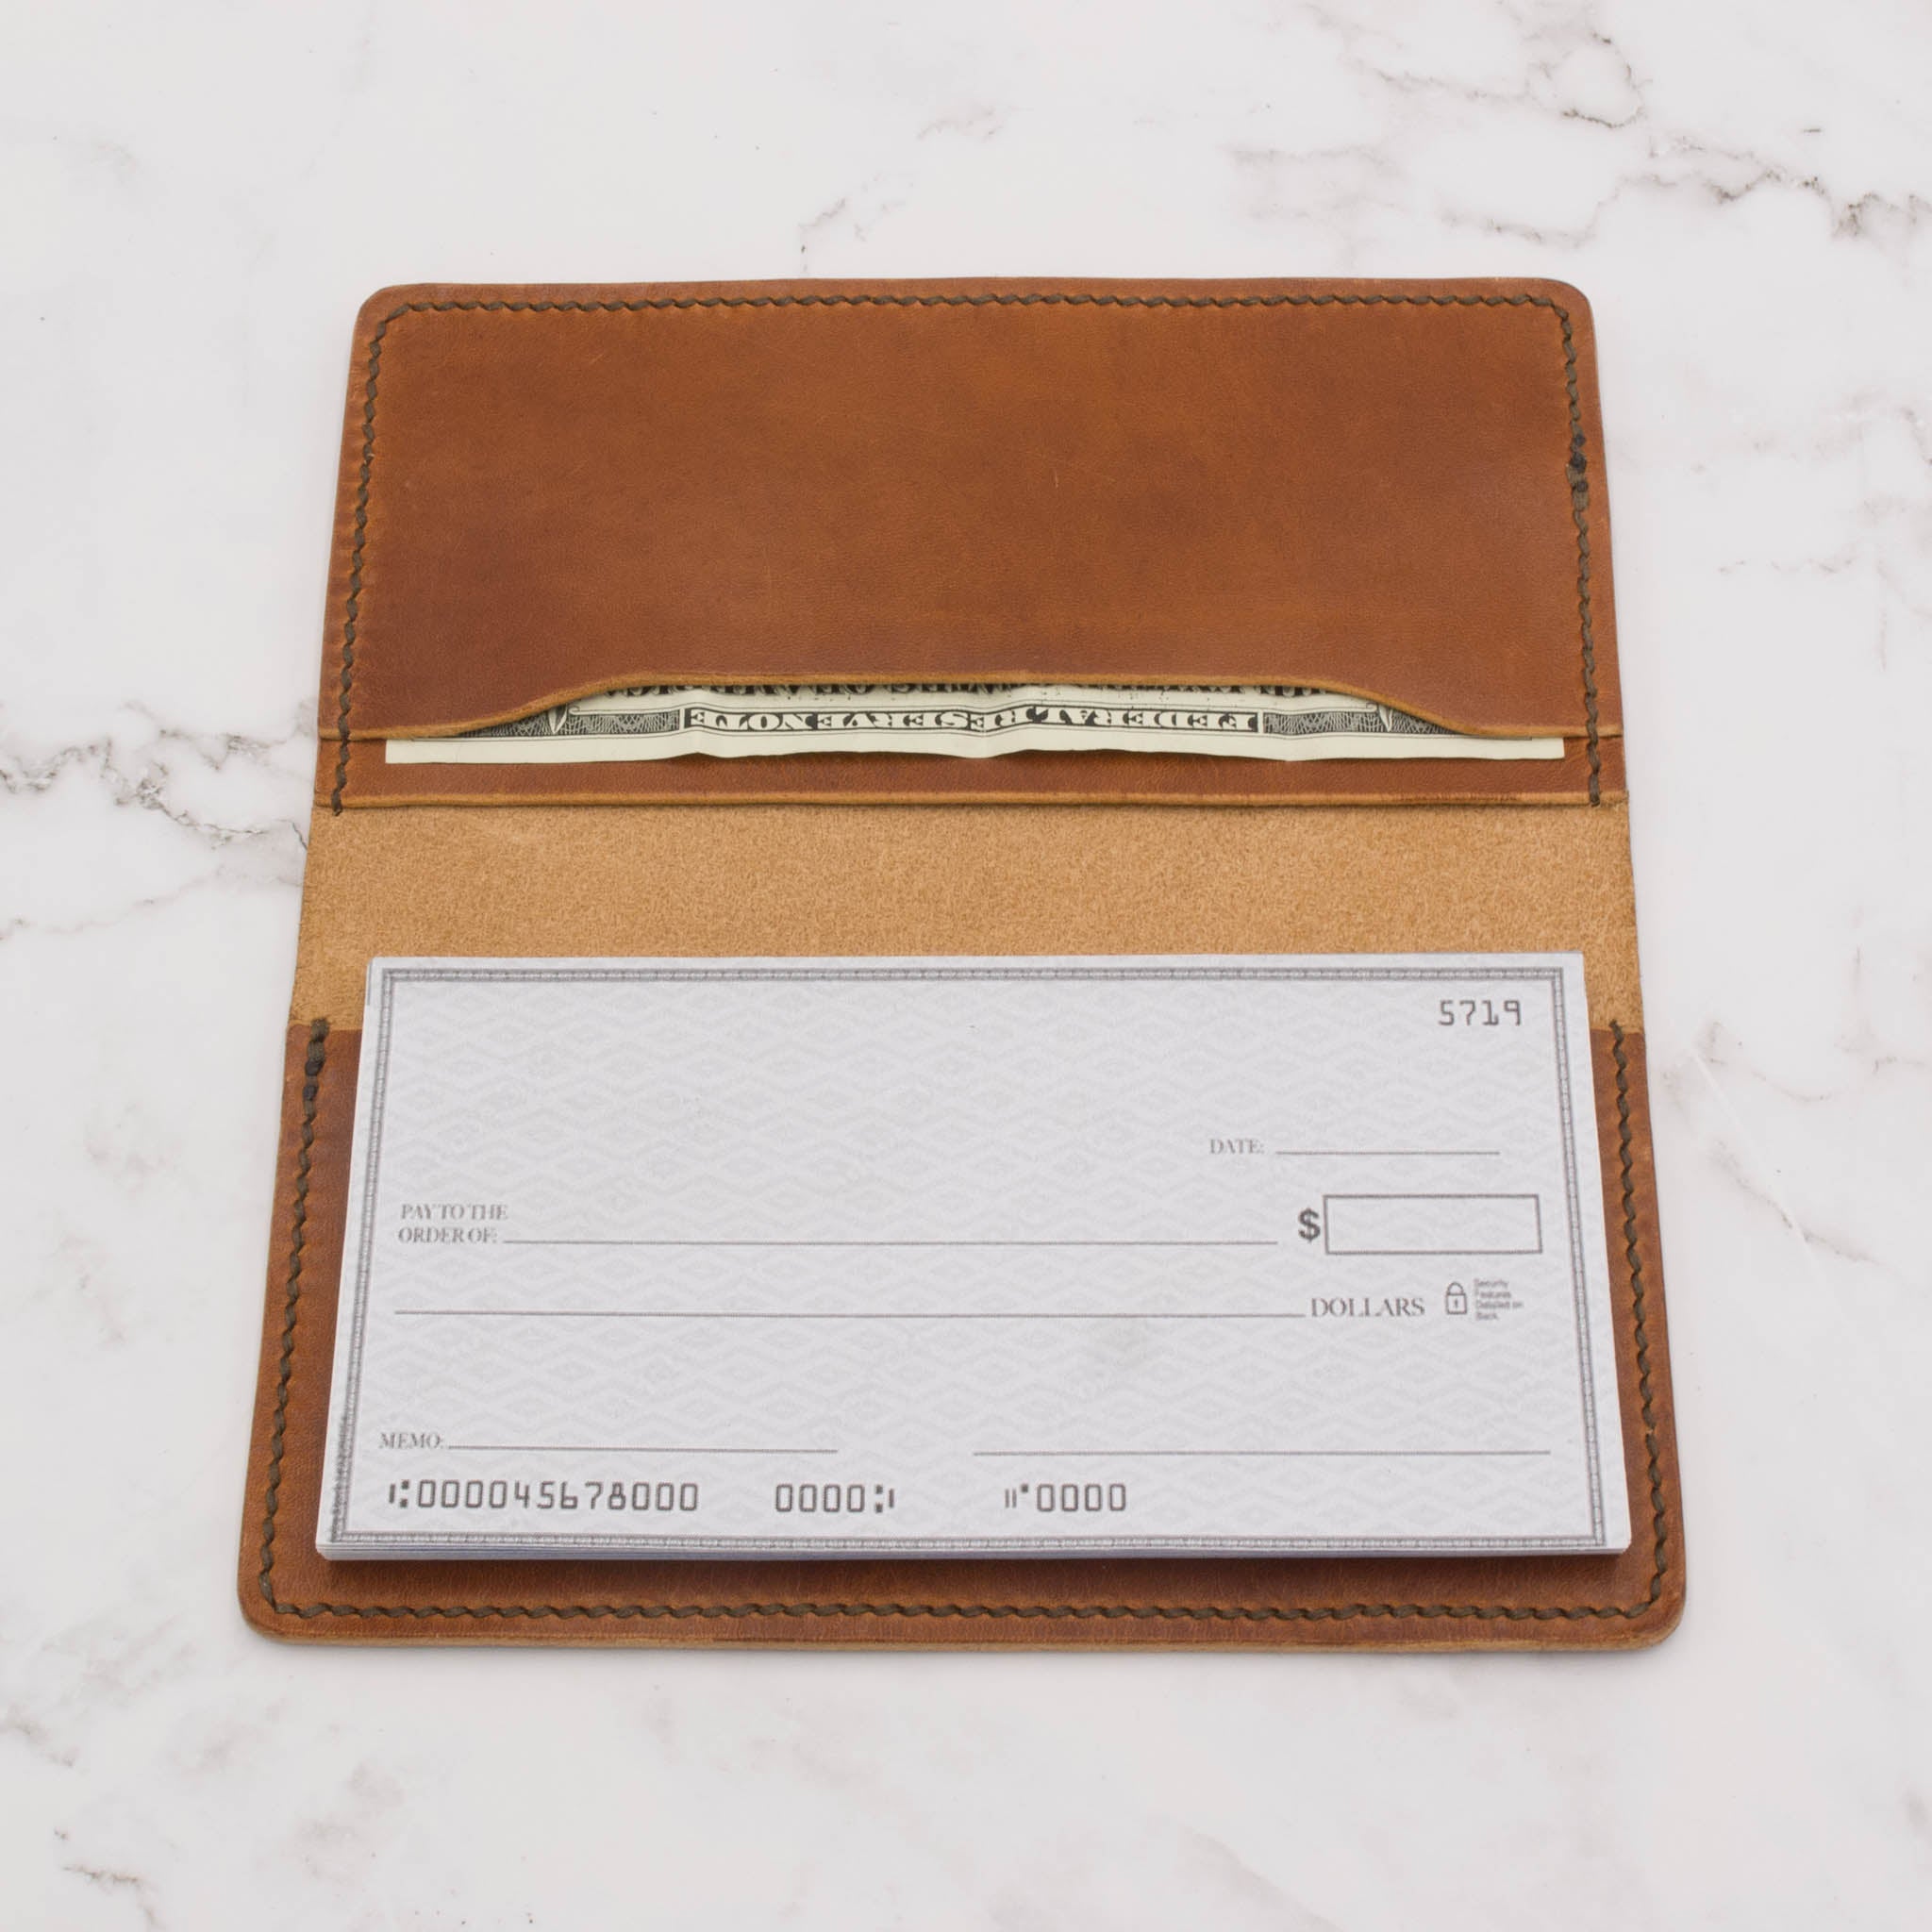 Handcrafted Leather Checkbook Cover - English Tan